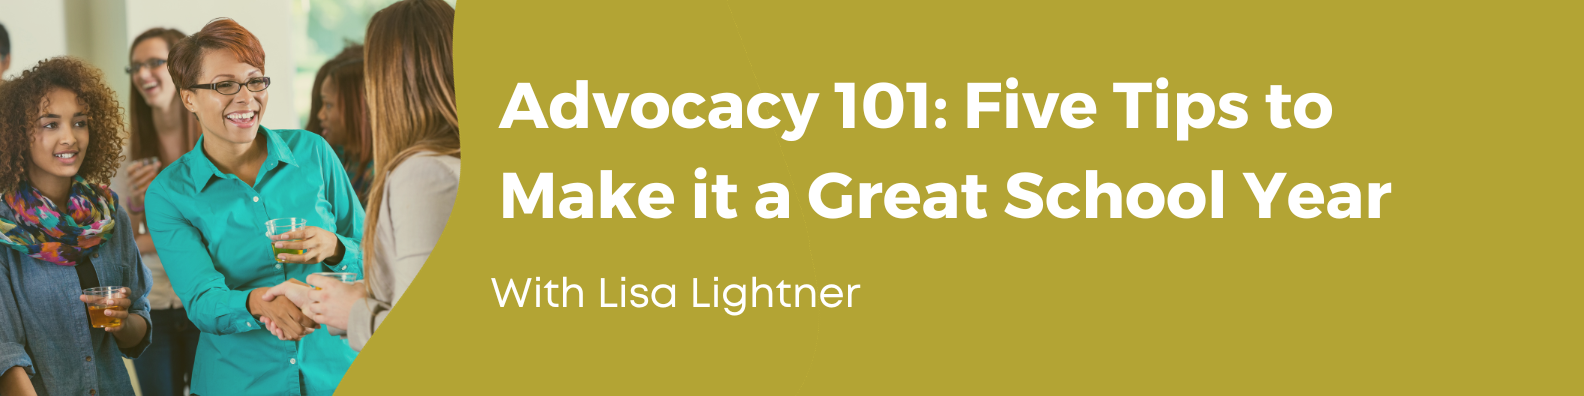 Advocacy 101: Five Tips to Make it a Great School Year With Lisa Lightner